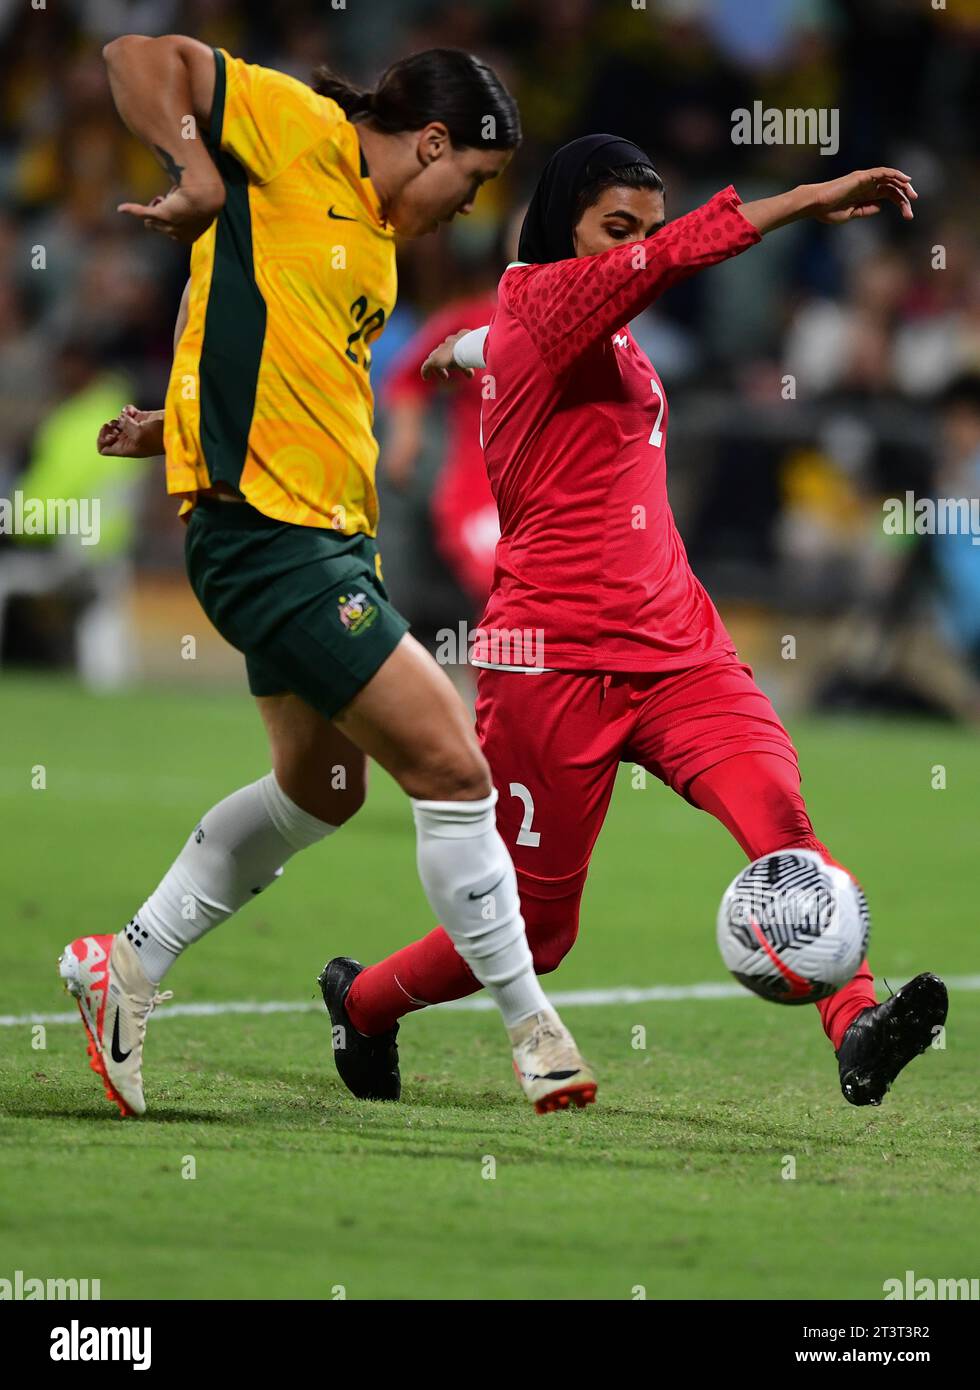 Perth, Australia. 26th Oct, 2023. Samantha May Kerr (L) of the Australia women's football team and Fatemeh Amineh Borazjani (R) of the Islamic Republic of Iran women's football team are seen in action during the 2024 AFC Women's football Olympic Qualifying Round 2 Group A match between Australia and Islamic Republic of Iran held at the Perth Rectangular Stadium. Final score Australia 2:0 Islamic Republic of Iran. Credit: SOPA Images Limited/Alamy Live News Stock Photo